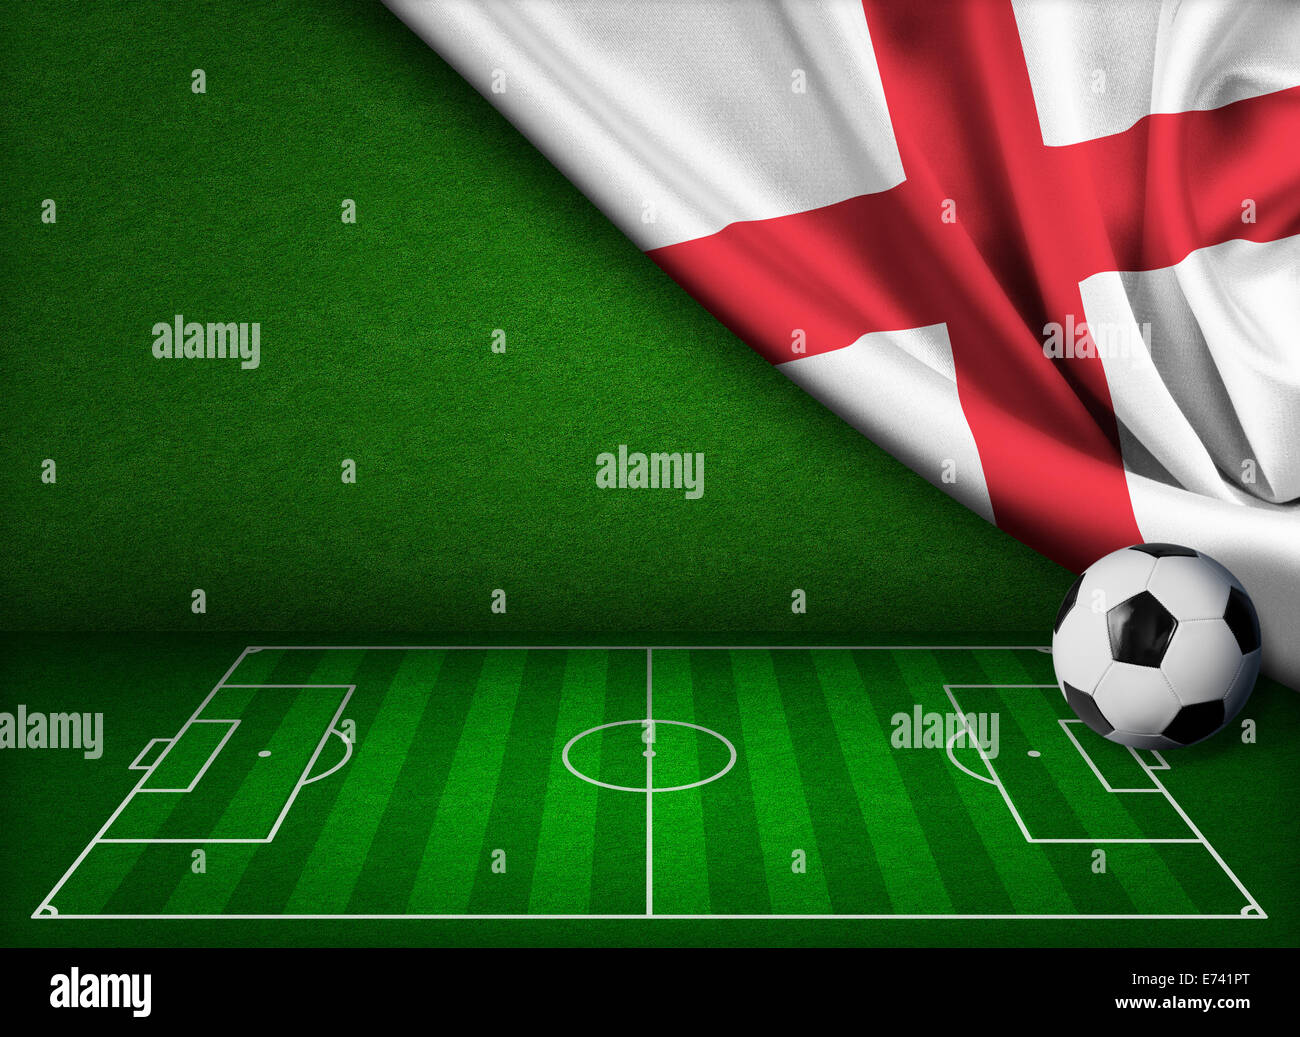 Soccer or football background with flag of England Stock Photo